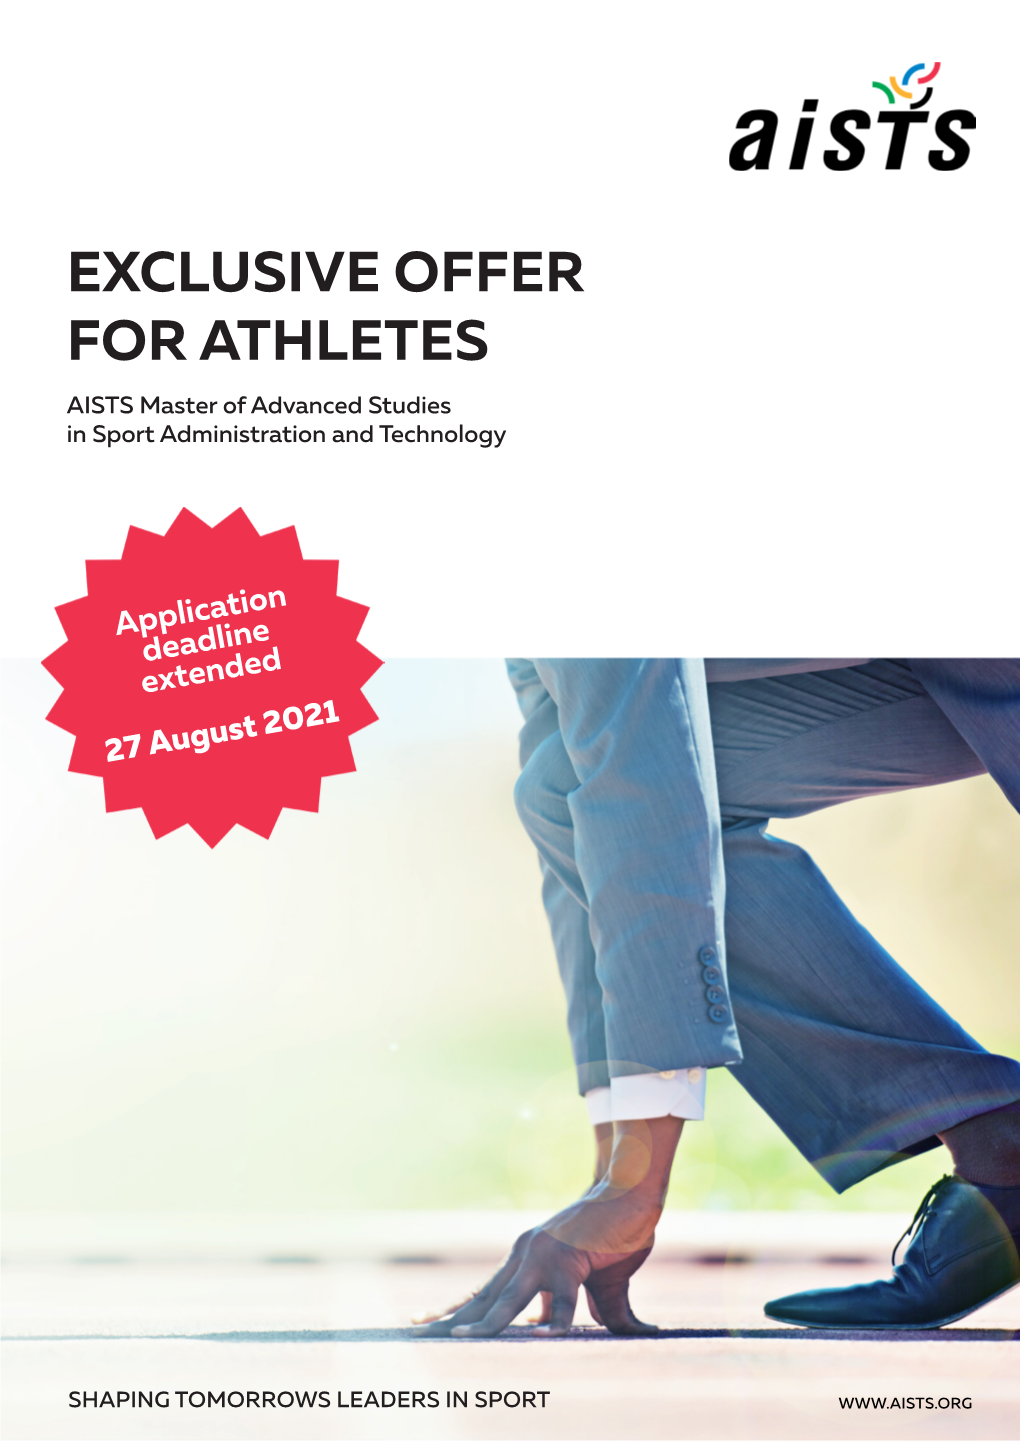 EXCLUSIVE OFFER for ATHLETES AISTS Master of Advanced Studies in Sport Administration and Technology